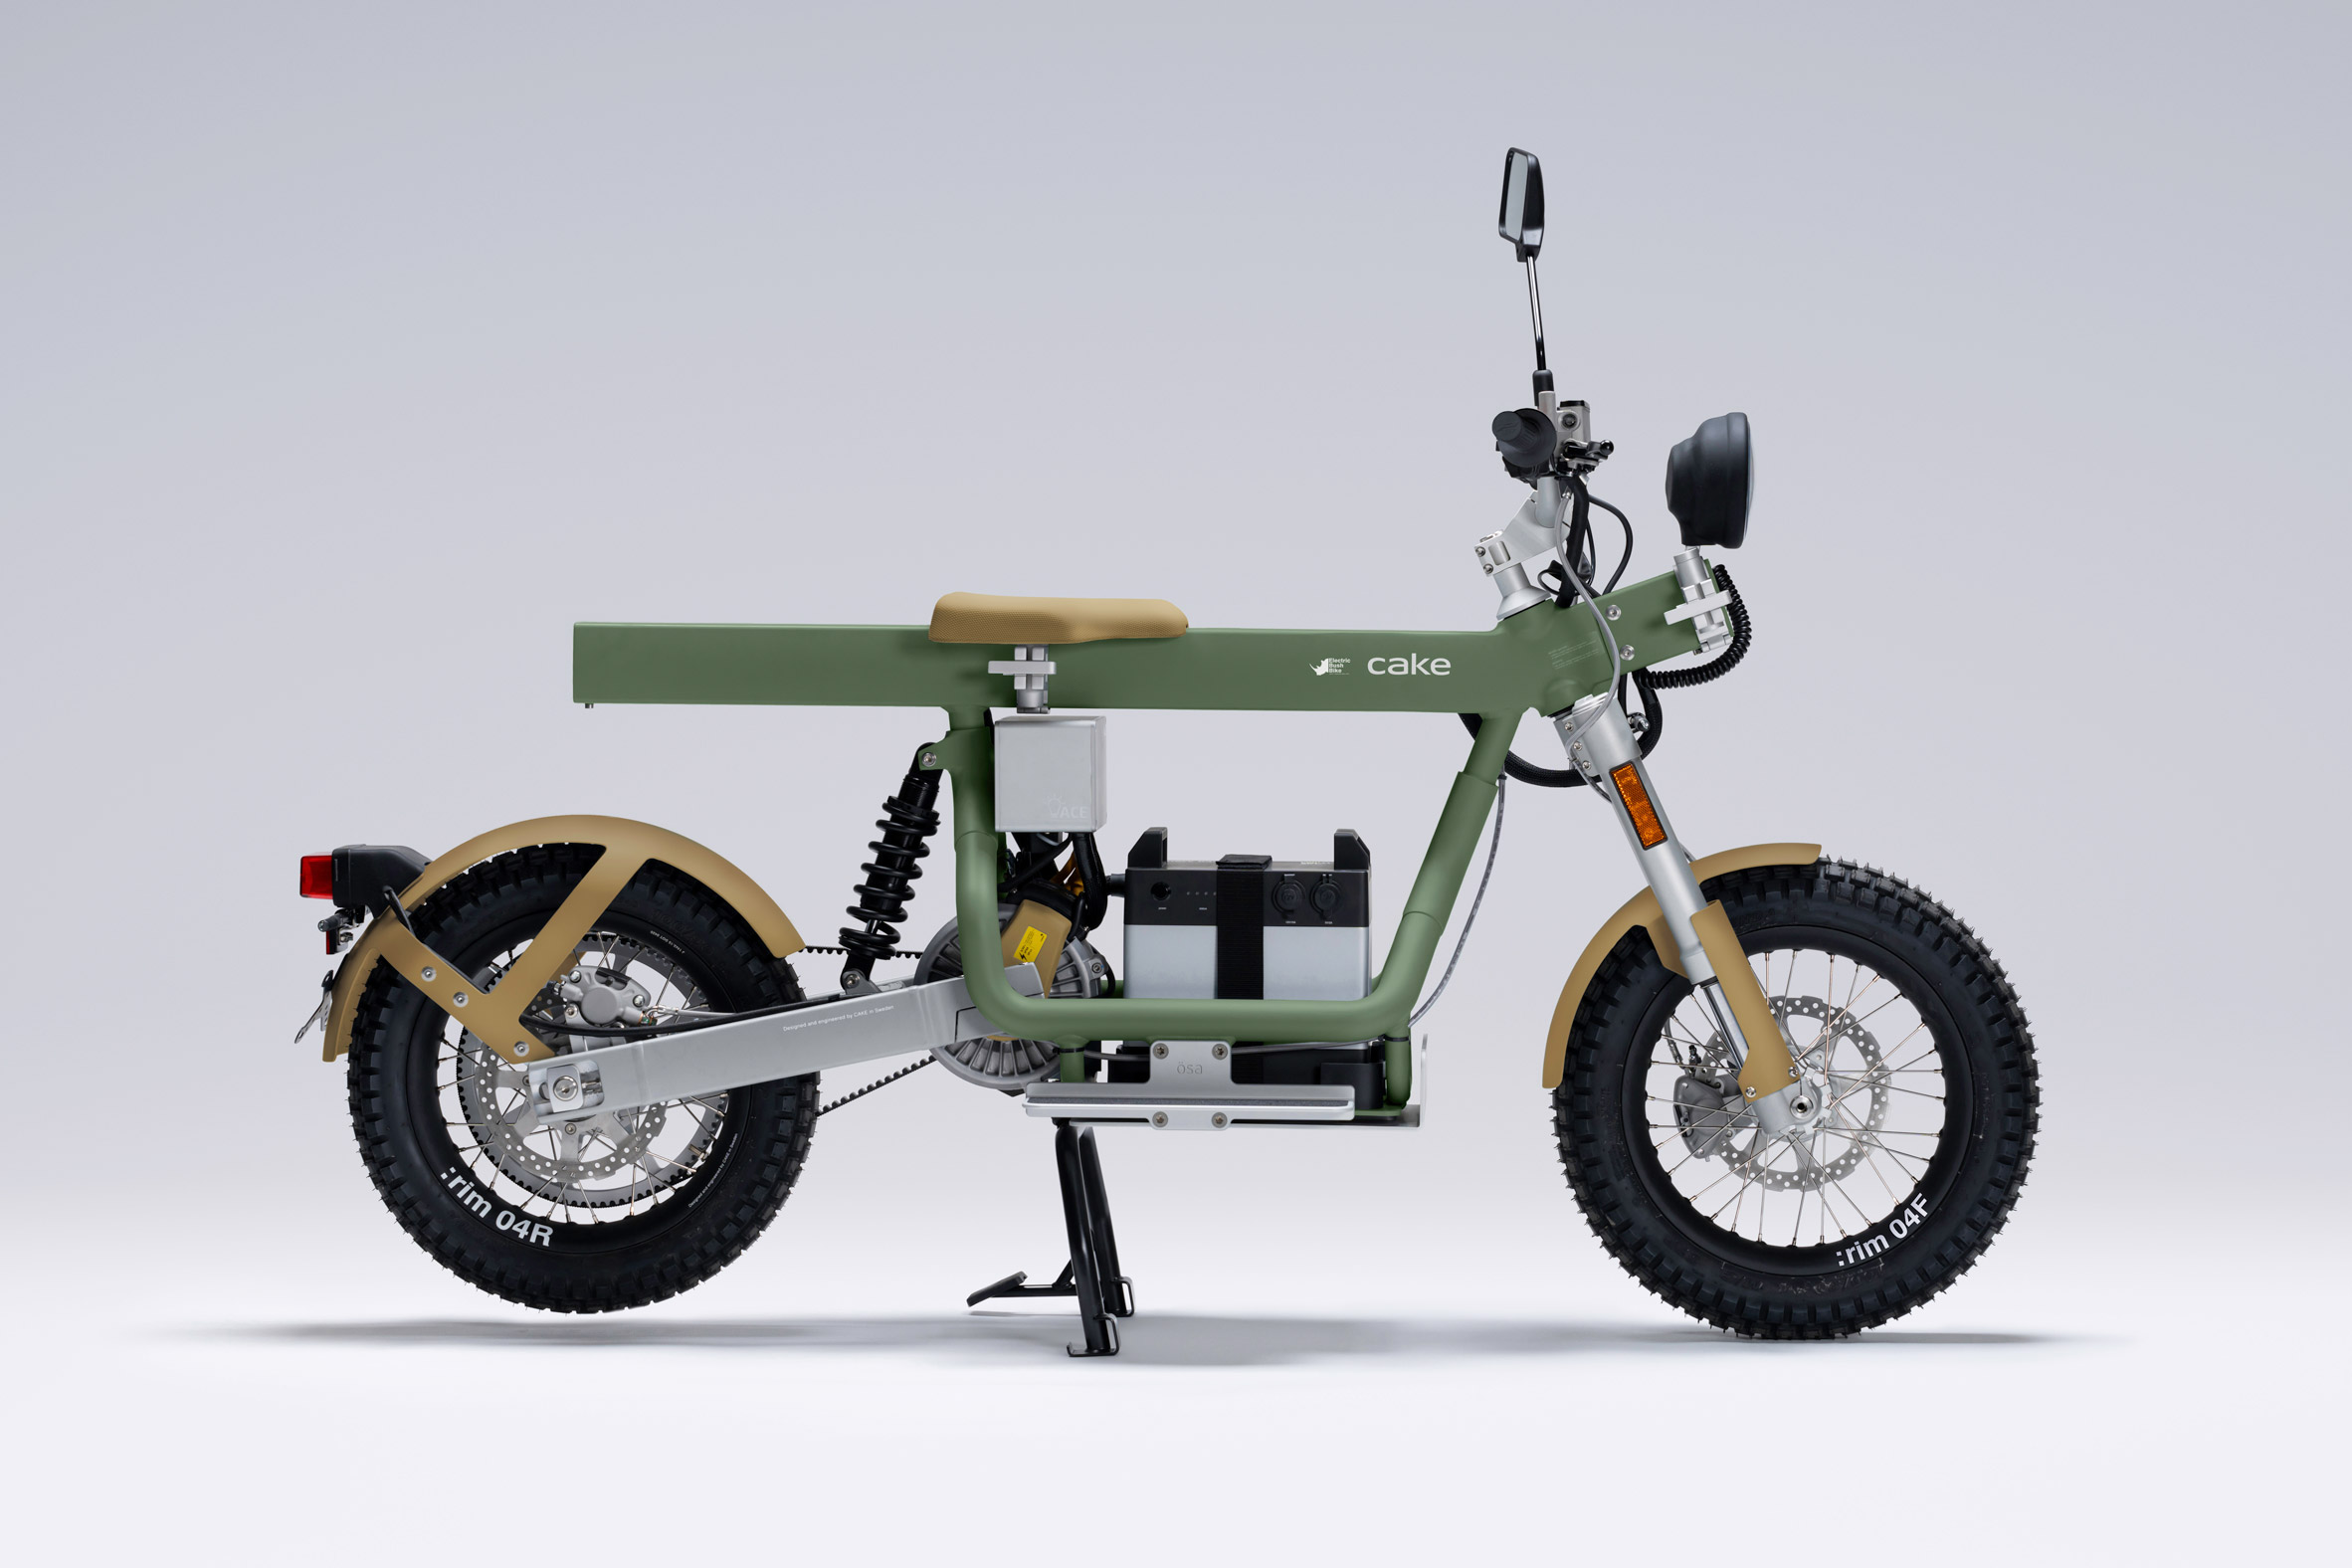 Going The Design Distance: CAKE's Odd But Lovable Ösa+ Electric Motorcycle  Thinks Different